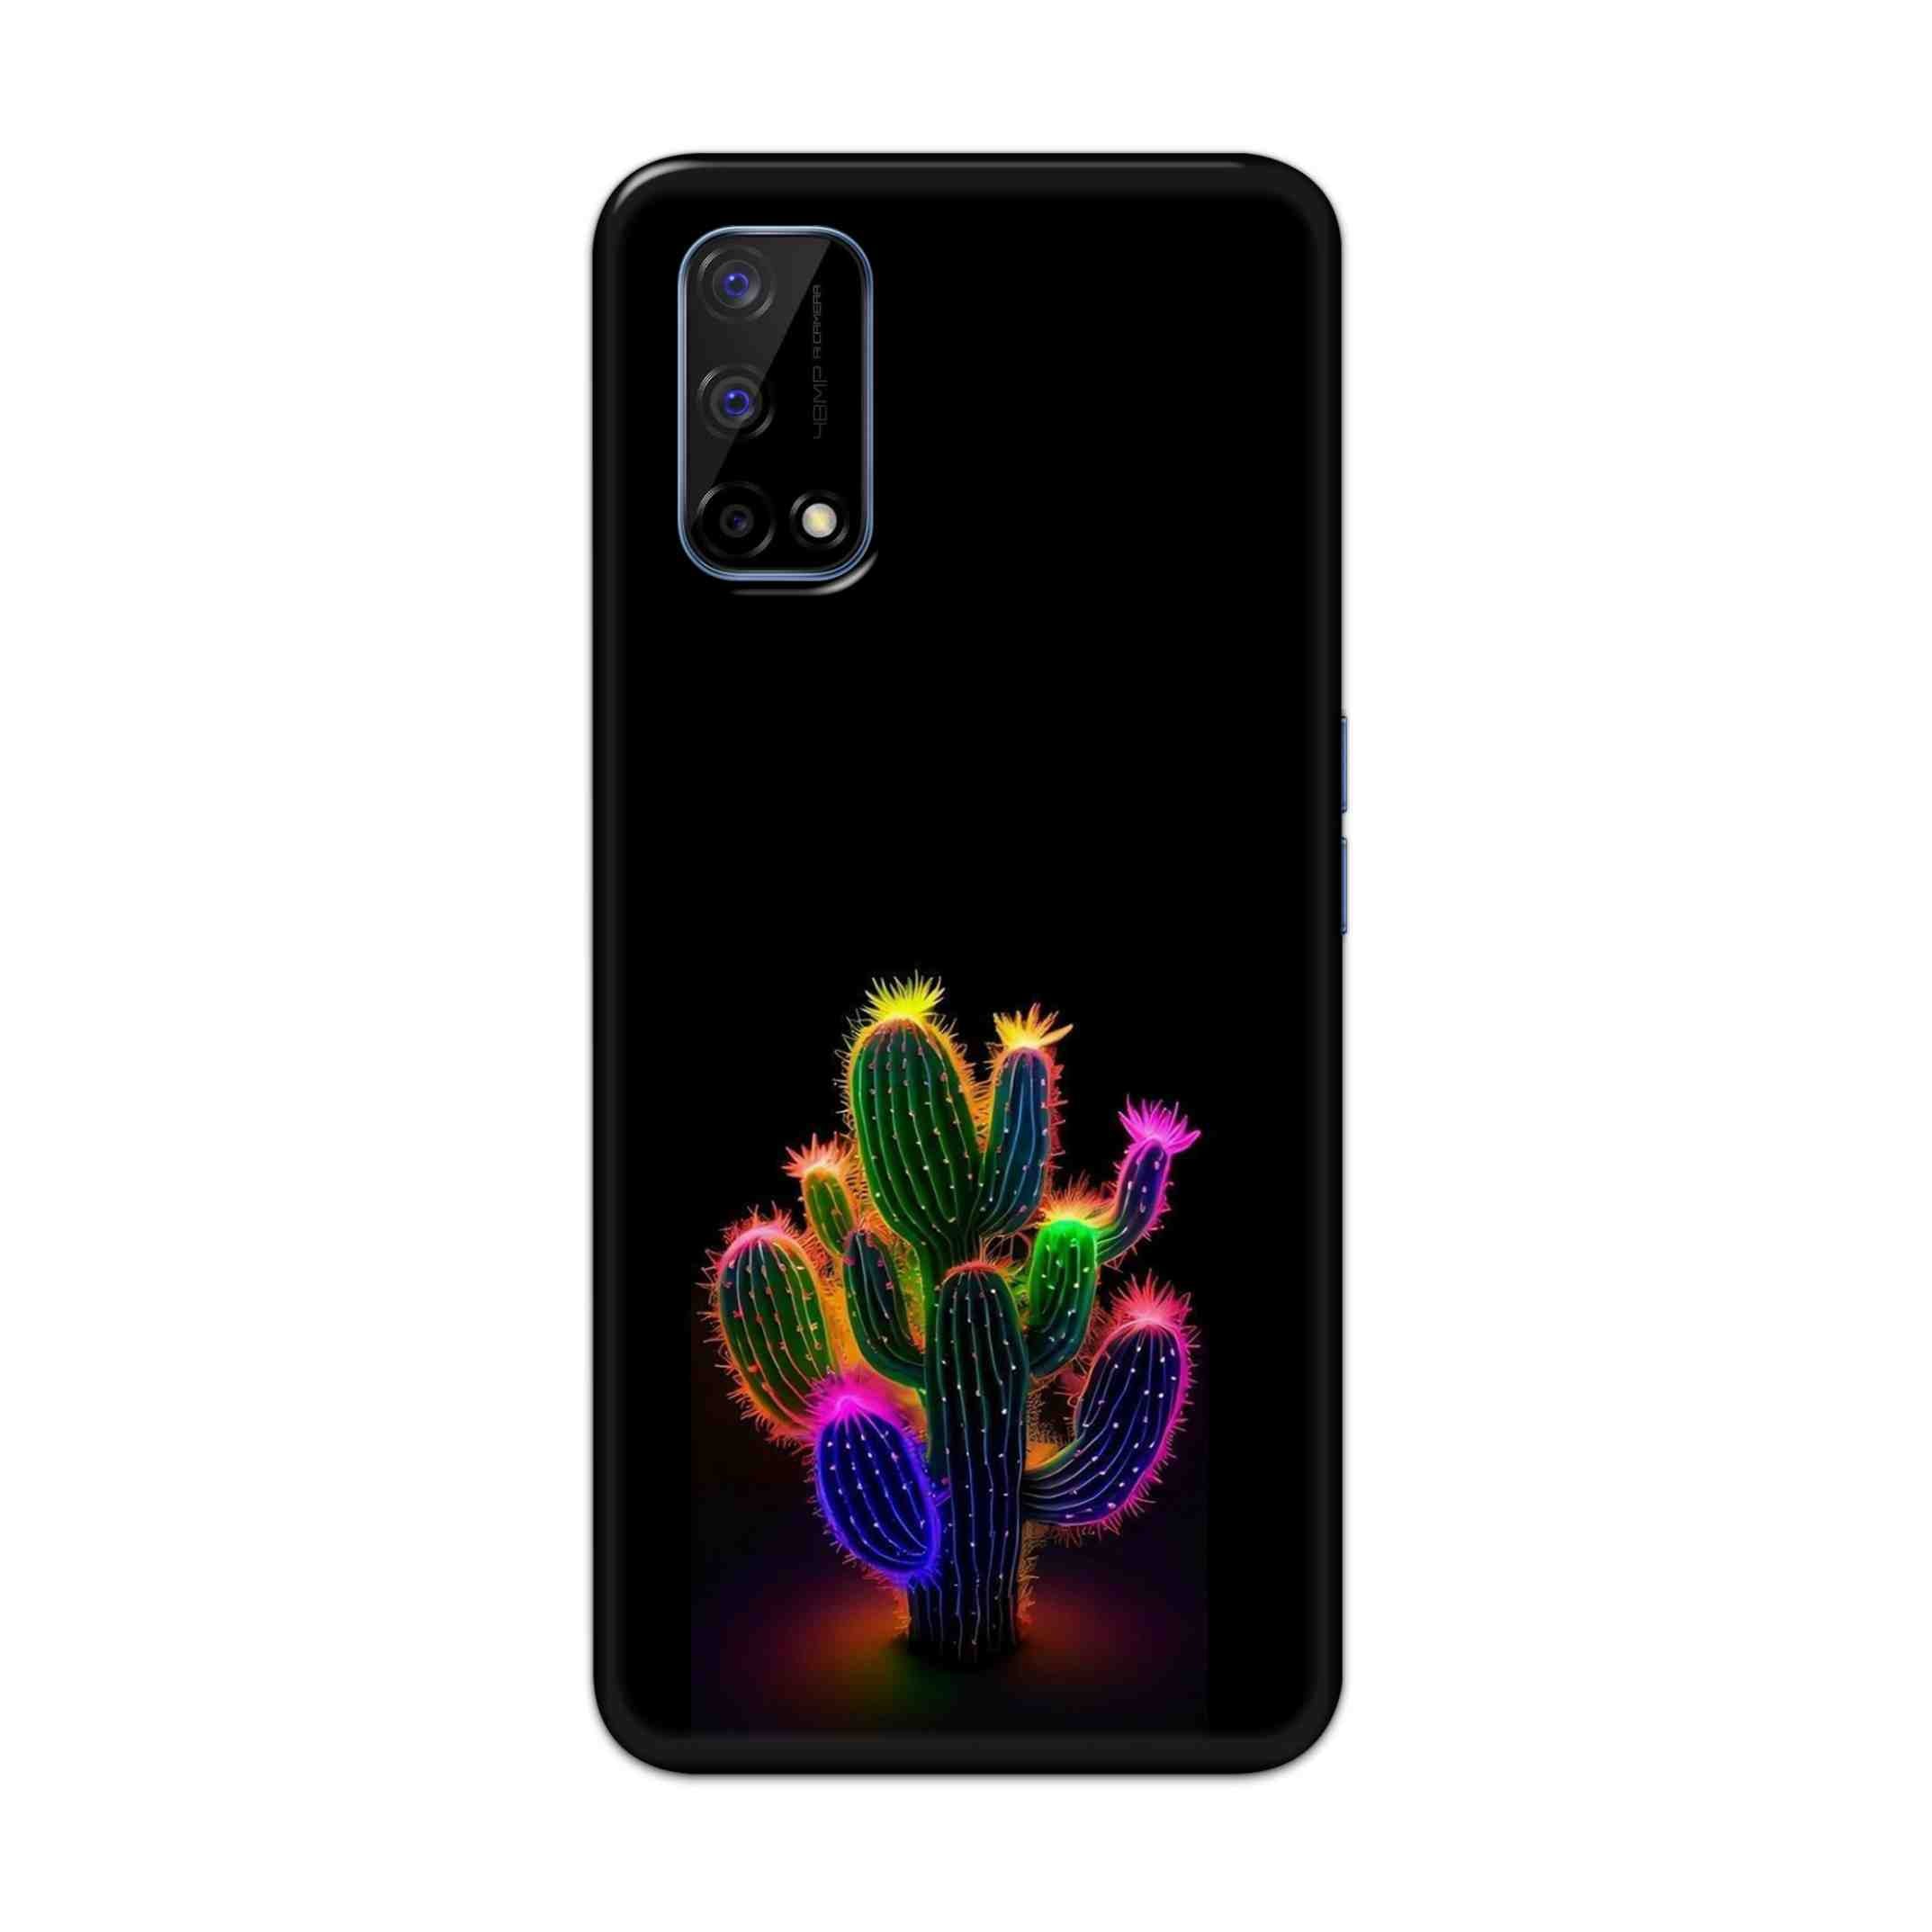 Buy Neon Flower Hard Back Mobile Phone Case Cover For Realme Narzo 30 Pro Online